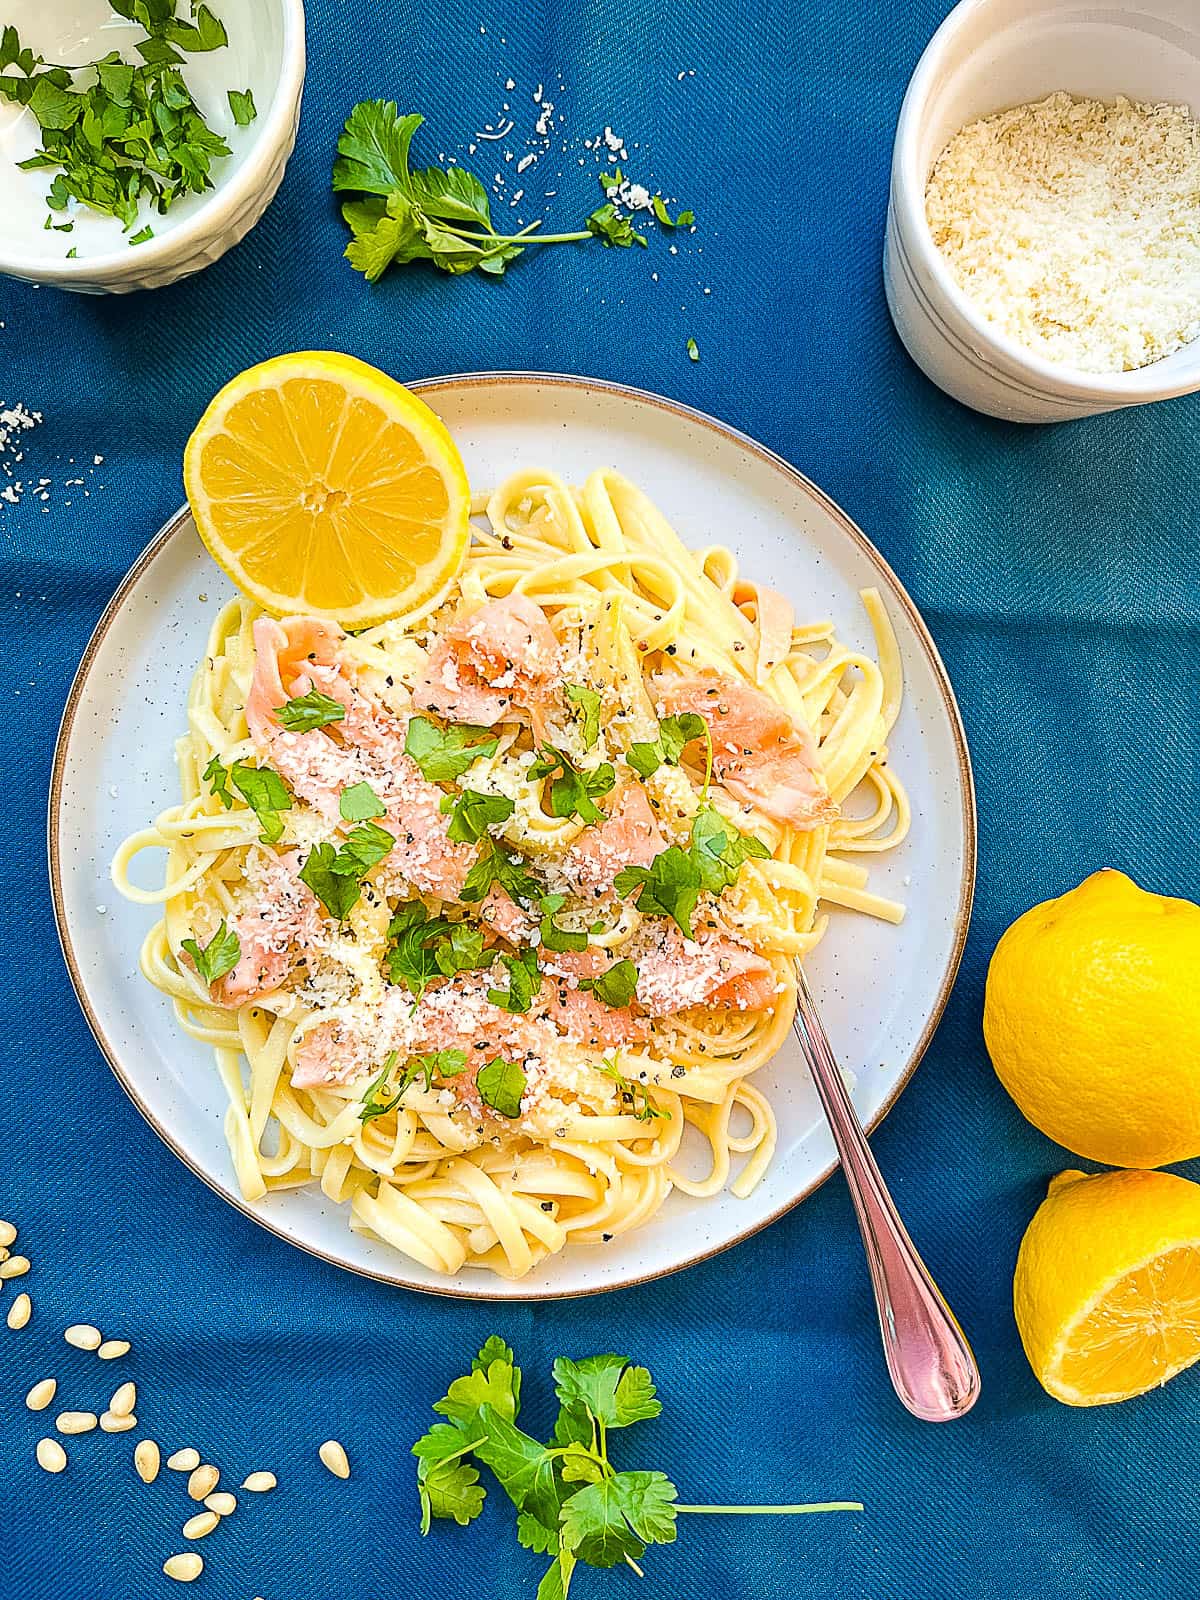 smoked salmon pasta carbonara no cream served on a plate with lemon and parmesan cheese